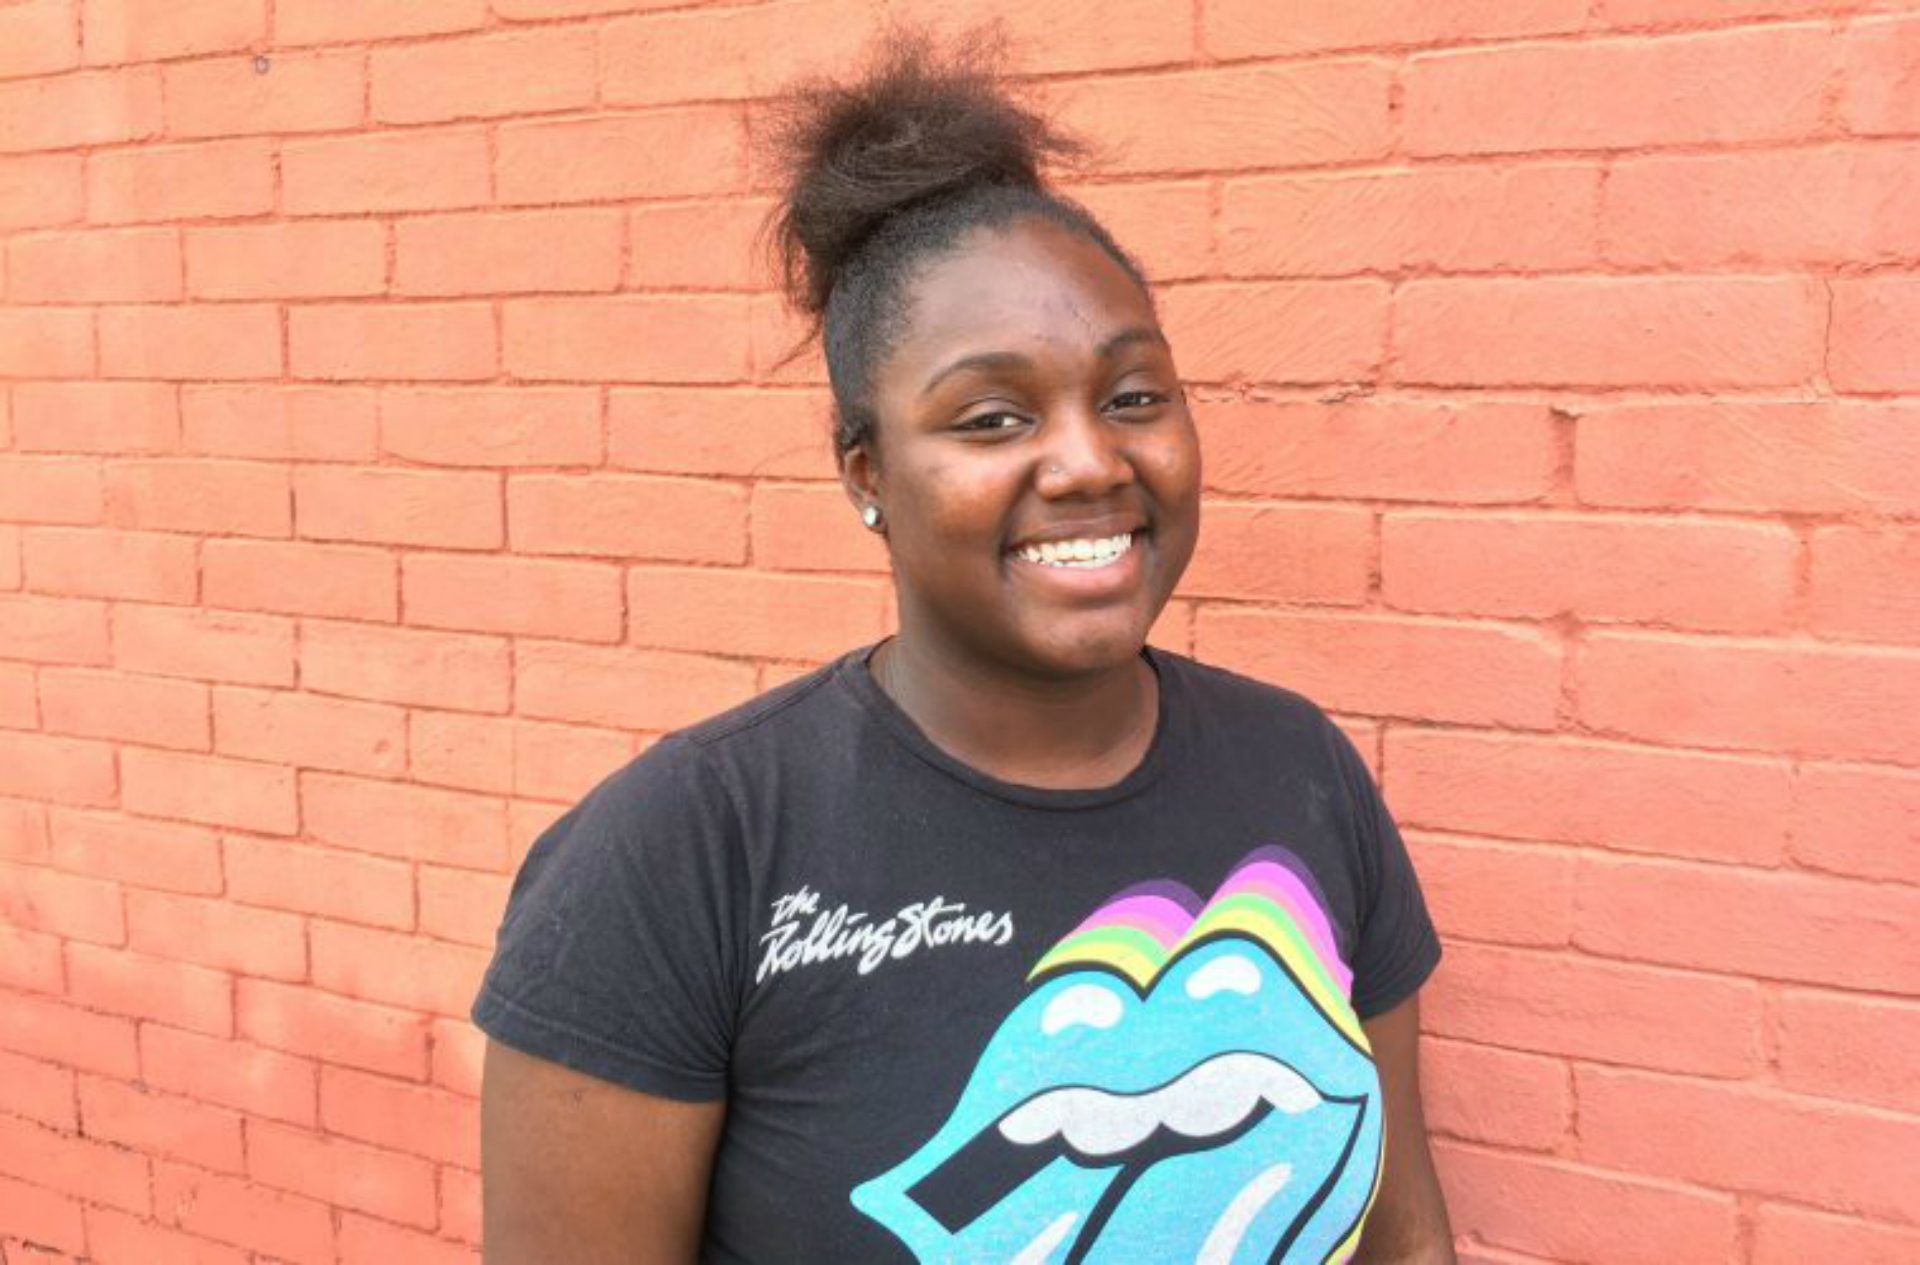 Kayonia Sowell is a 10th grade student at Brashear High School in Pittsburgh. 